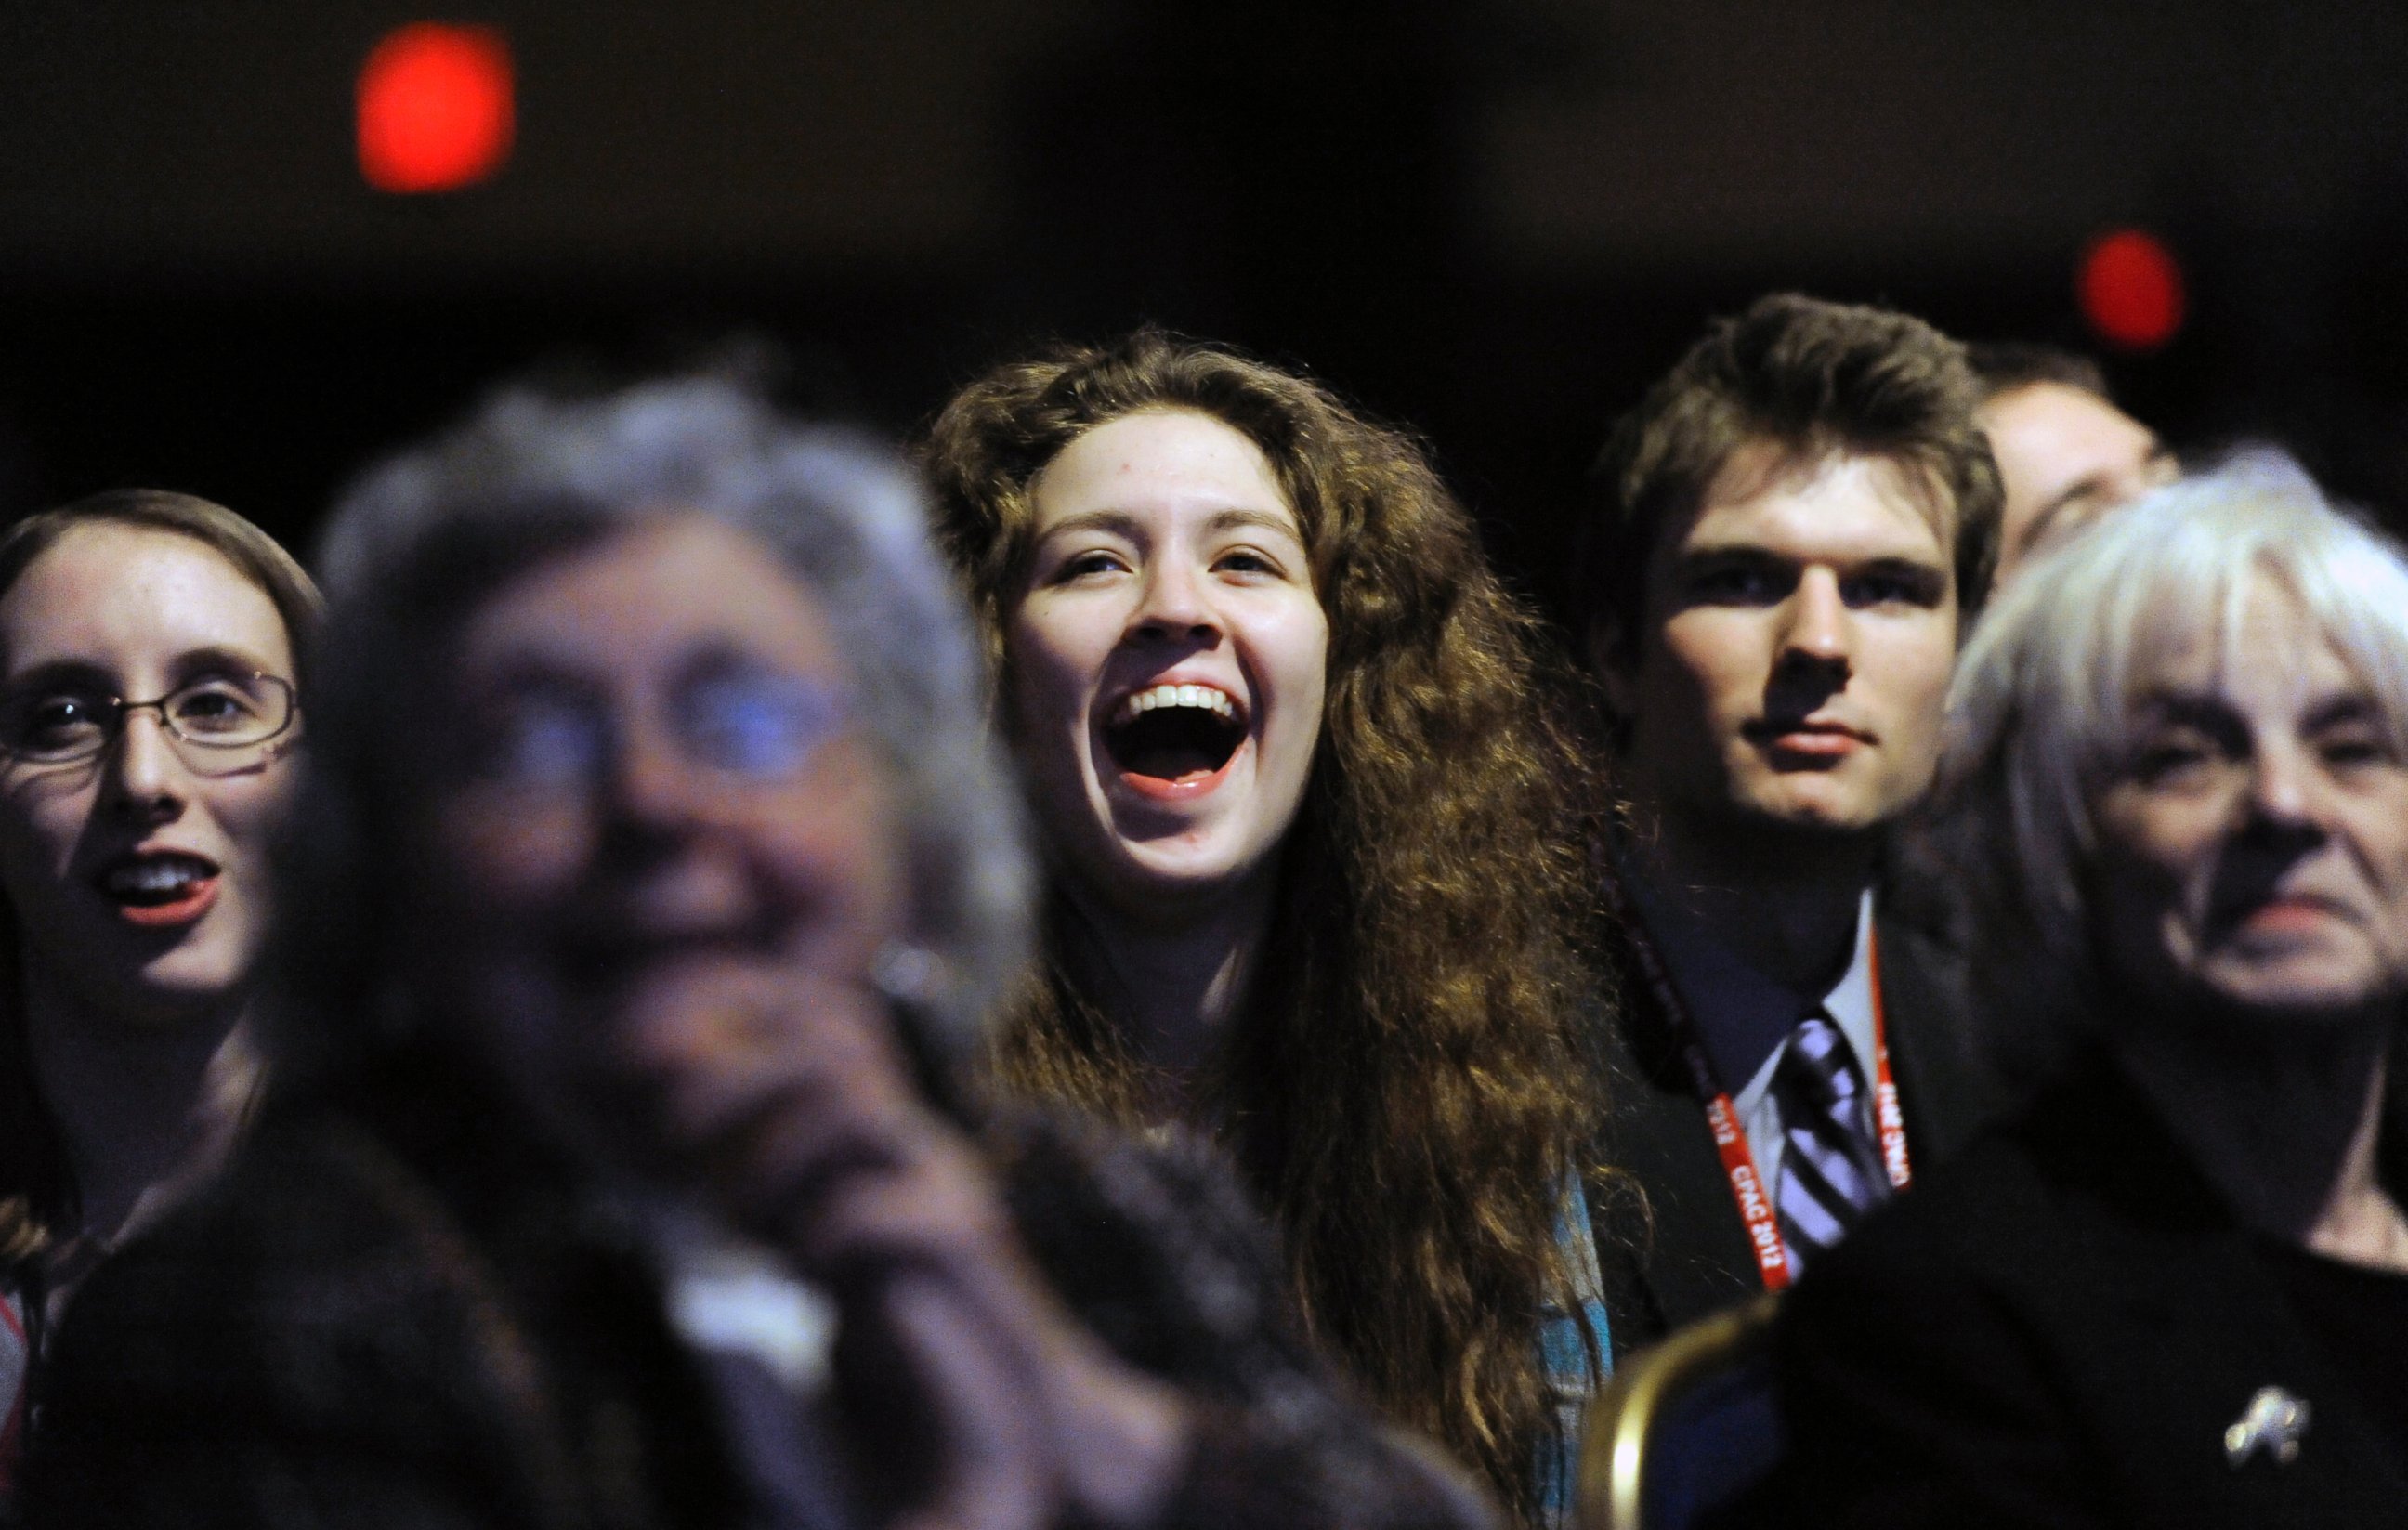 PHOTO: An audience with conservative ideals listens and cheer for Herman Cain at the 39th Annual CPAC Conference in Washington, Feb. 9, 2012.